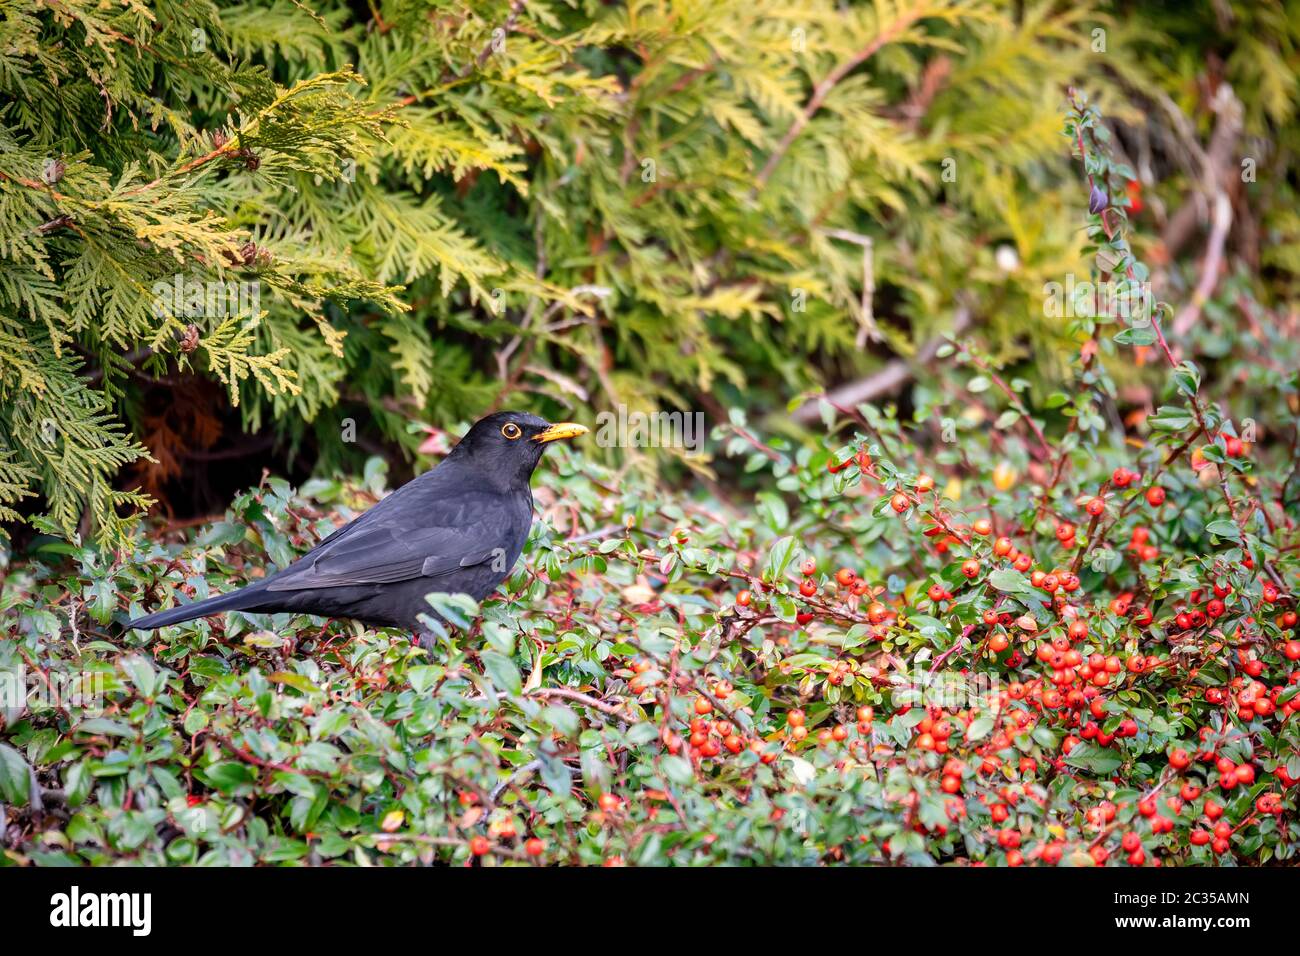 male of Common blackbird, Turdus merula, on berry of Cotoneaster plant in winter garden without snow Stock Photo